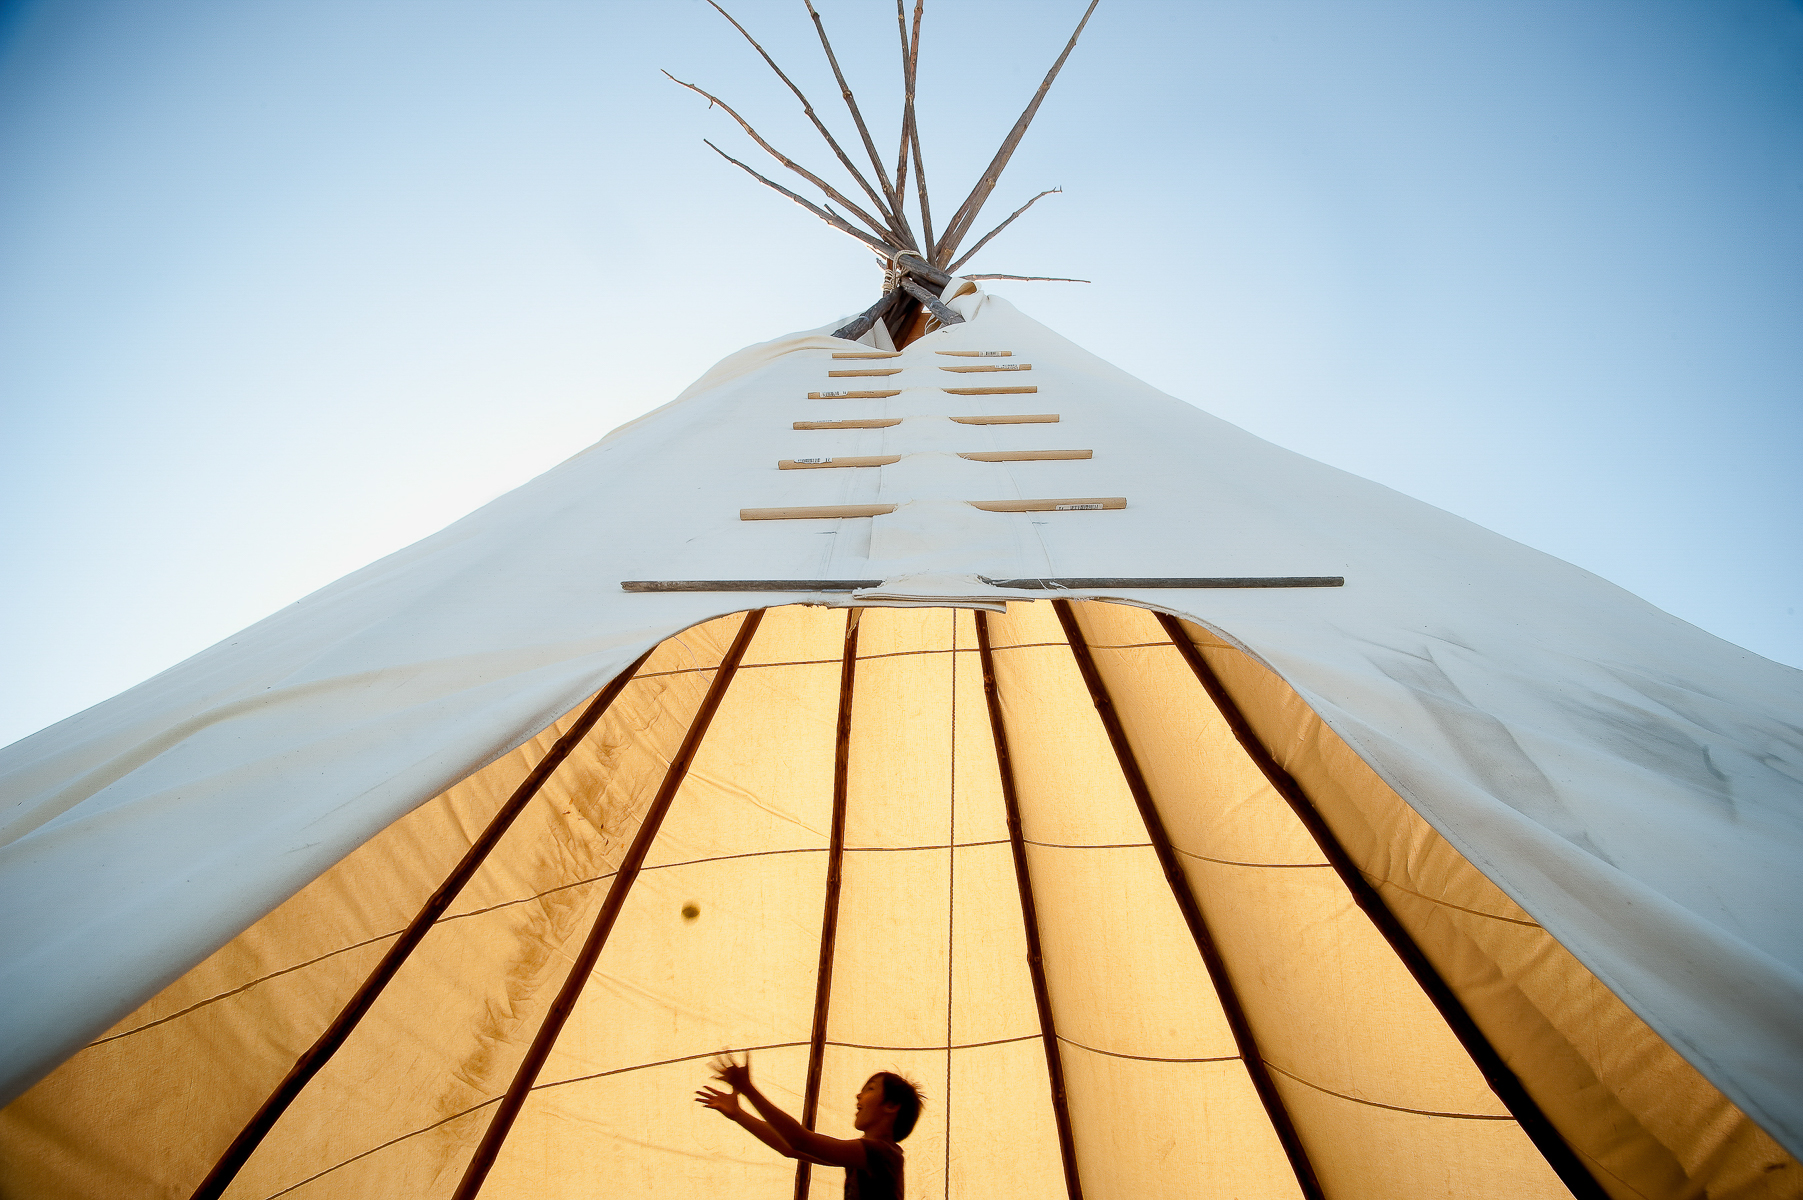 Shelby Childs, 9, of Red Wing, Minnesota, played inside a teepee at the Legacy of Survival event in Flandreau, South Dakota on Thursday, August 16, 2012. Held on the 150th anniversary of the beginning of the US-Dakota Conflict of 1862, the three-day event celebrated the resilience of the Dakota people and their culture.